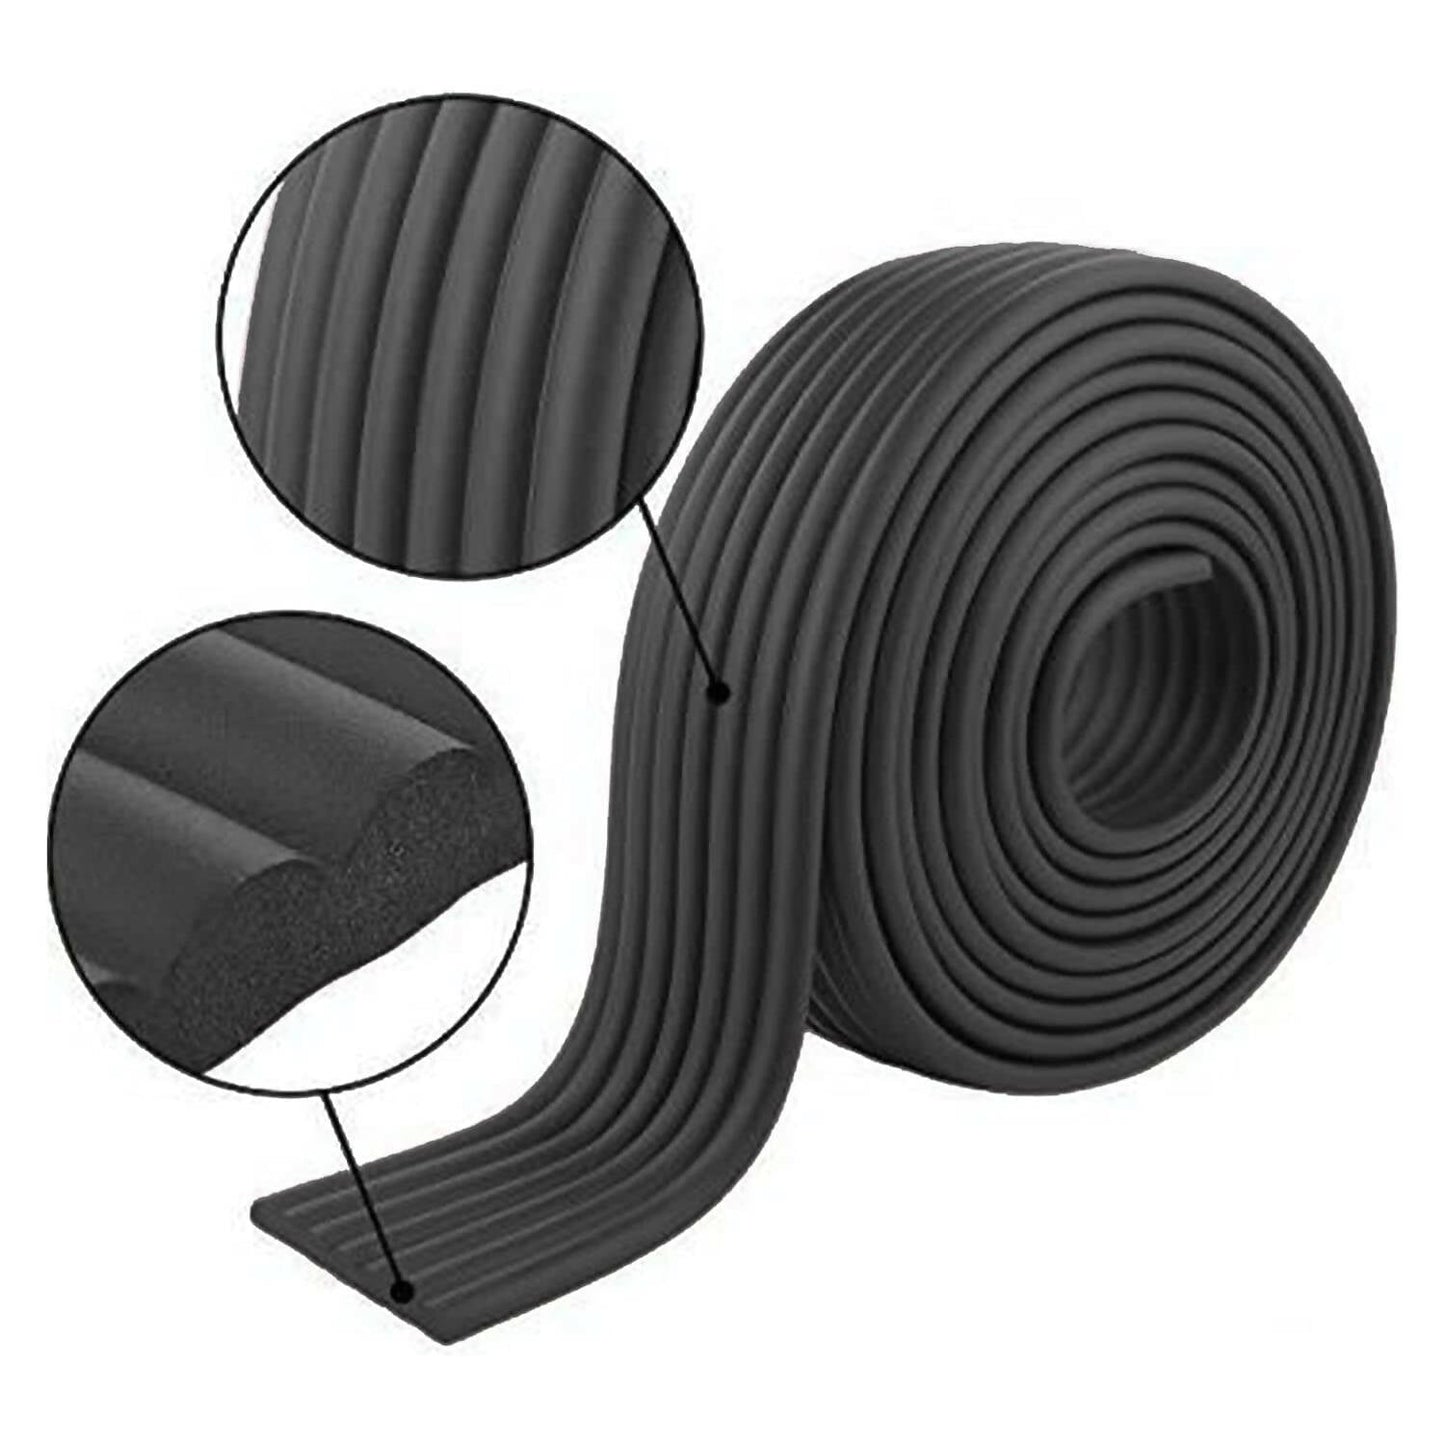 Safe-O-Kid Unique High Density- Prevents From Head Injury Multifunctional 2 Meter Edge Guard - Black